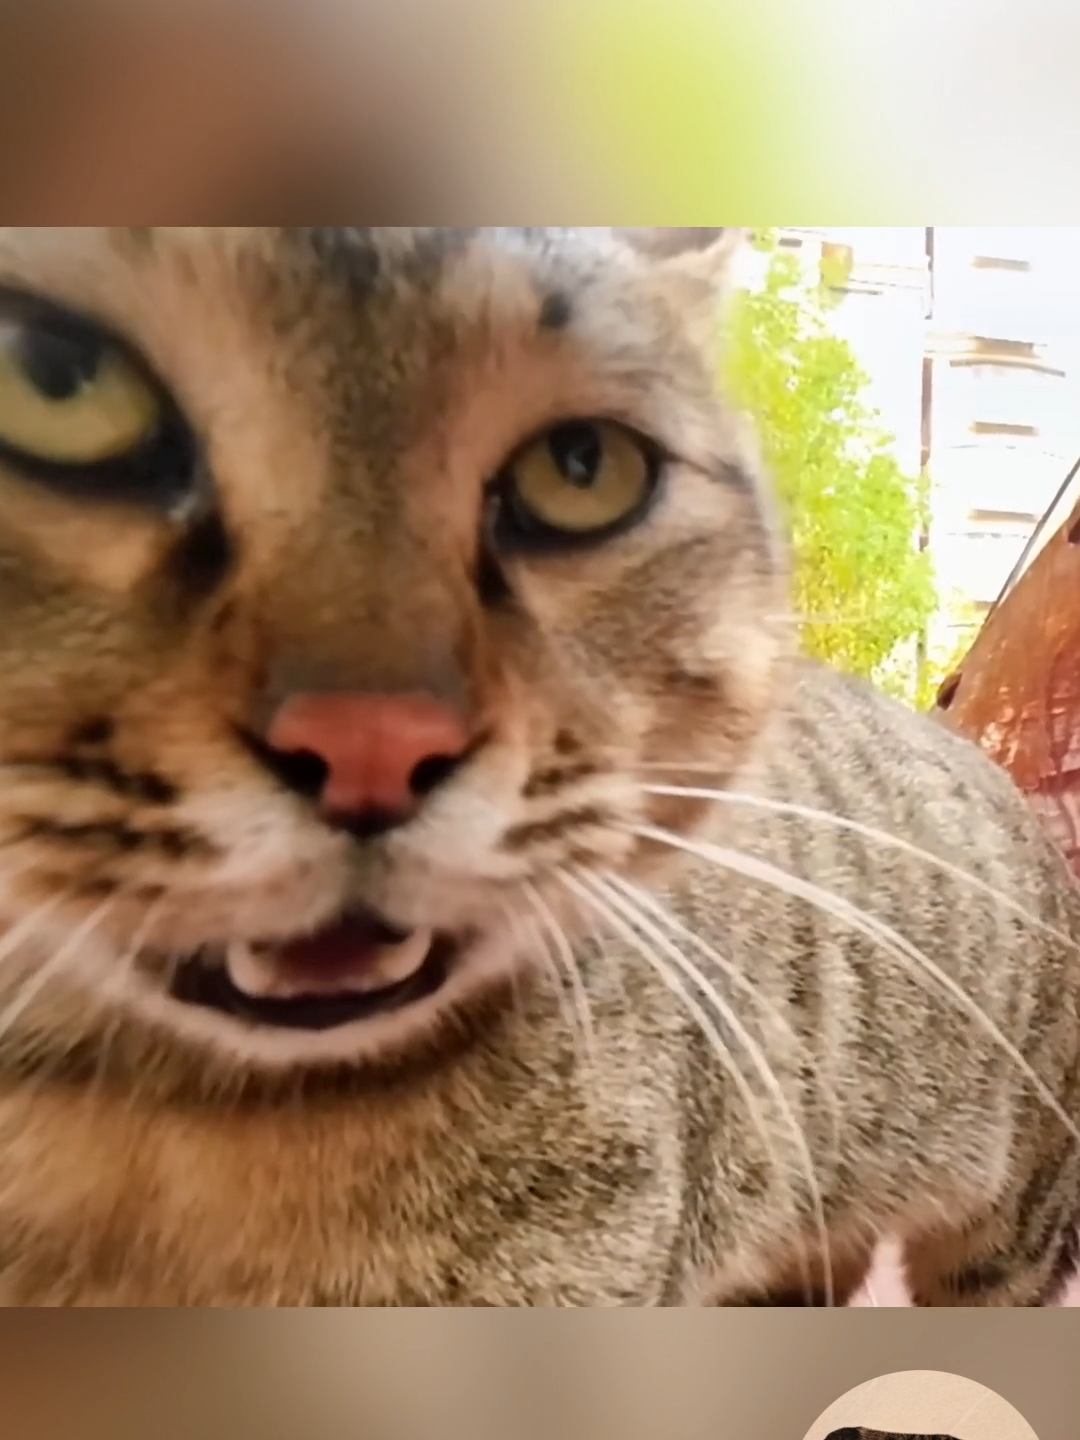 Funny Cats and GoPro #funnycat #funnycatsoftiktok #catandcamera #funnypets #angrycat #catlover #catreaction #catsreactions #fucnnyreaction #funnyreactionvideos #angrycats